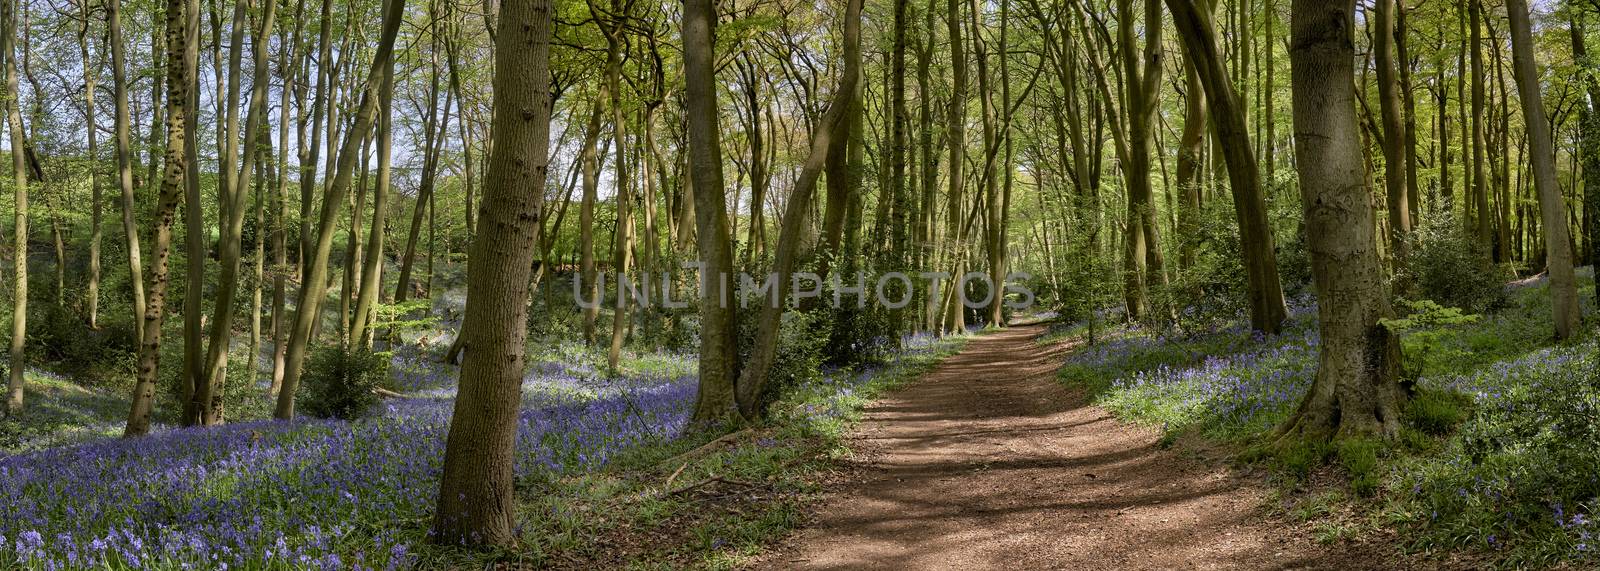 Panoramic view of woods showing a footpath and flowering bluebells at springtime in The Chiltern Hills, England                             